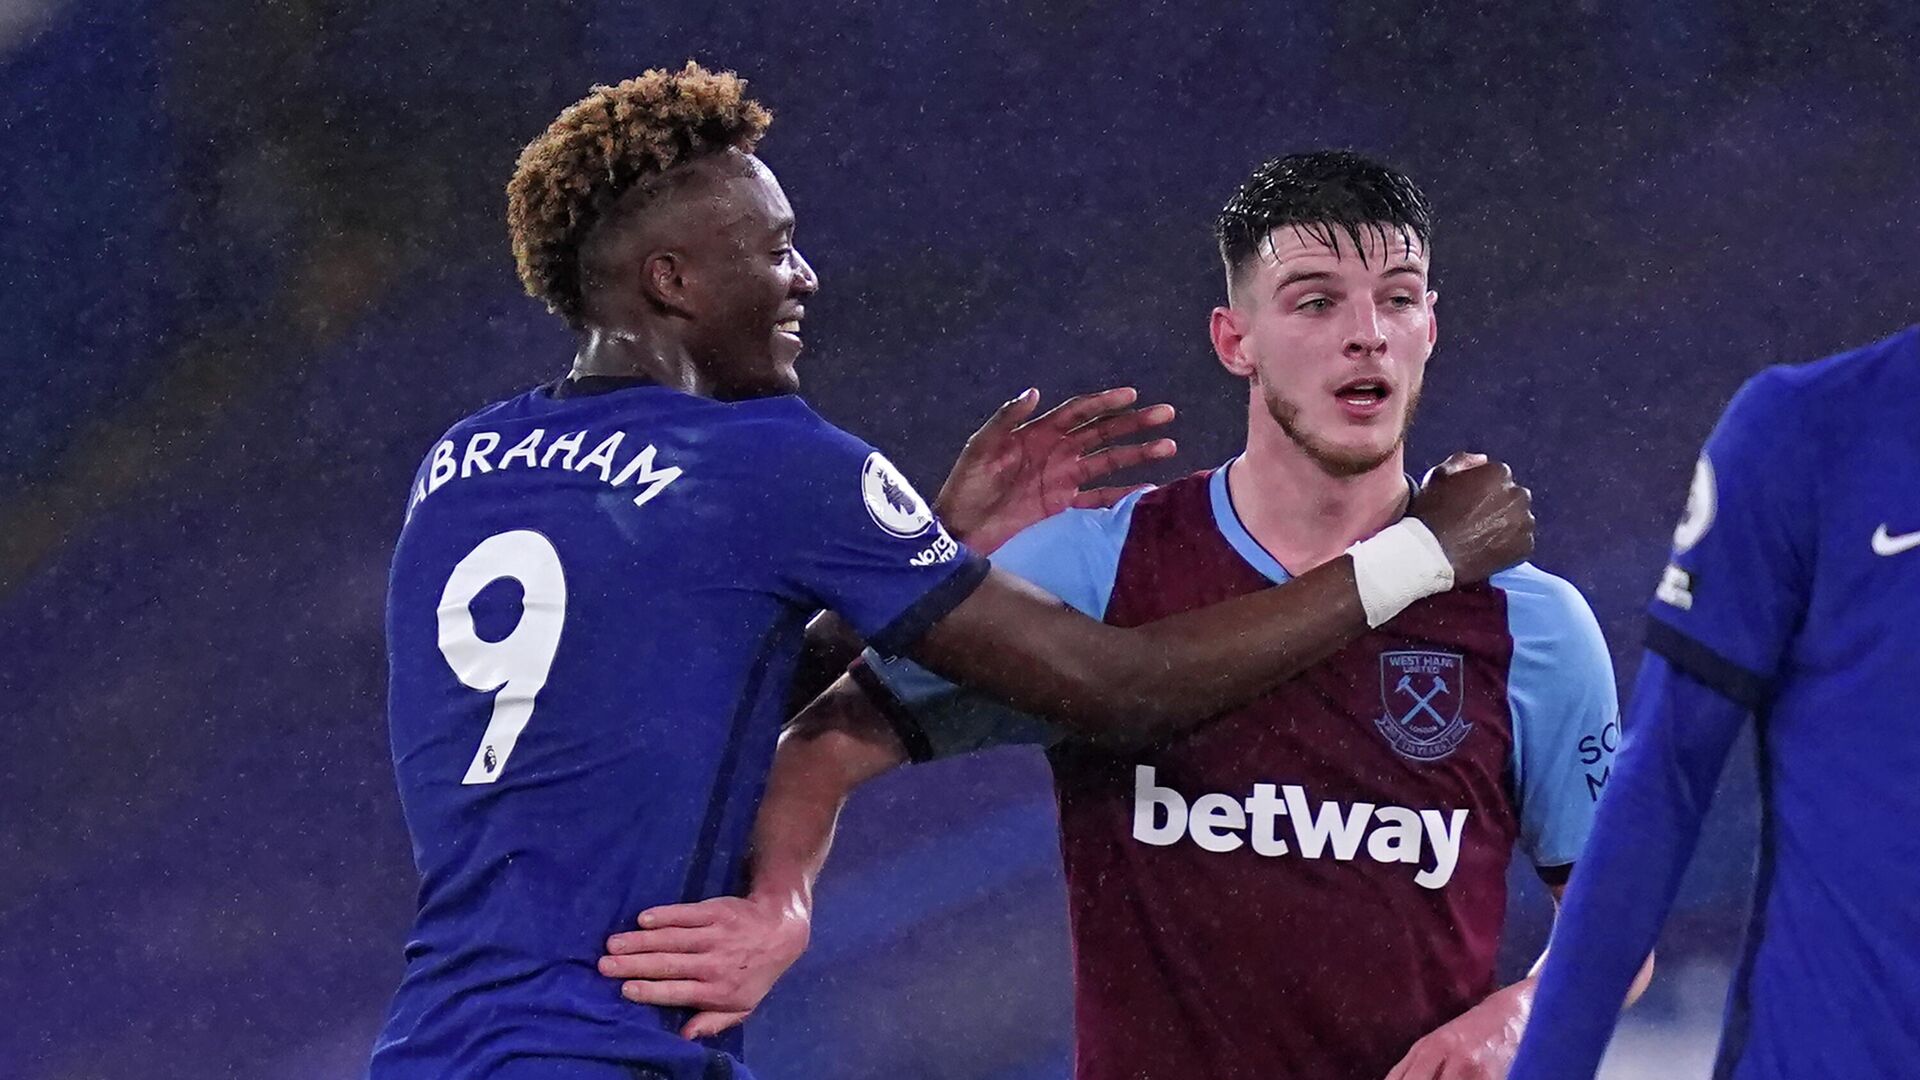 Chelsea's English striker Tammy Abraham (L) speaks with West Ham United's English midfielder Declan Rice (R) on the pitch after the English Premier League football match between Chelsea and West Ham United at Stamford Bridge in London on December 21, 2020. - Chelsea won the game 3-0. (Photo by John Walton / POOL / AFP) / RESTRICTED TO EDITORIAL USE. No use with unauthorized audio, video, data, fixture lists, club/league logos or 'live' services. Online in-match use limited to 120 images. An additional 40 images may be used in extra time. No video emulation. Social media in-match use limited to 120 images. An additional 40 images may be used in extra time. No use in betting publications, games or single club/league/player publications. /  - РИА Новости, 1920, 22.12.2020